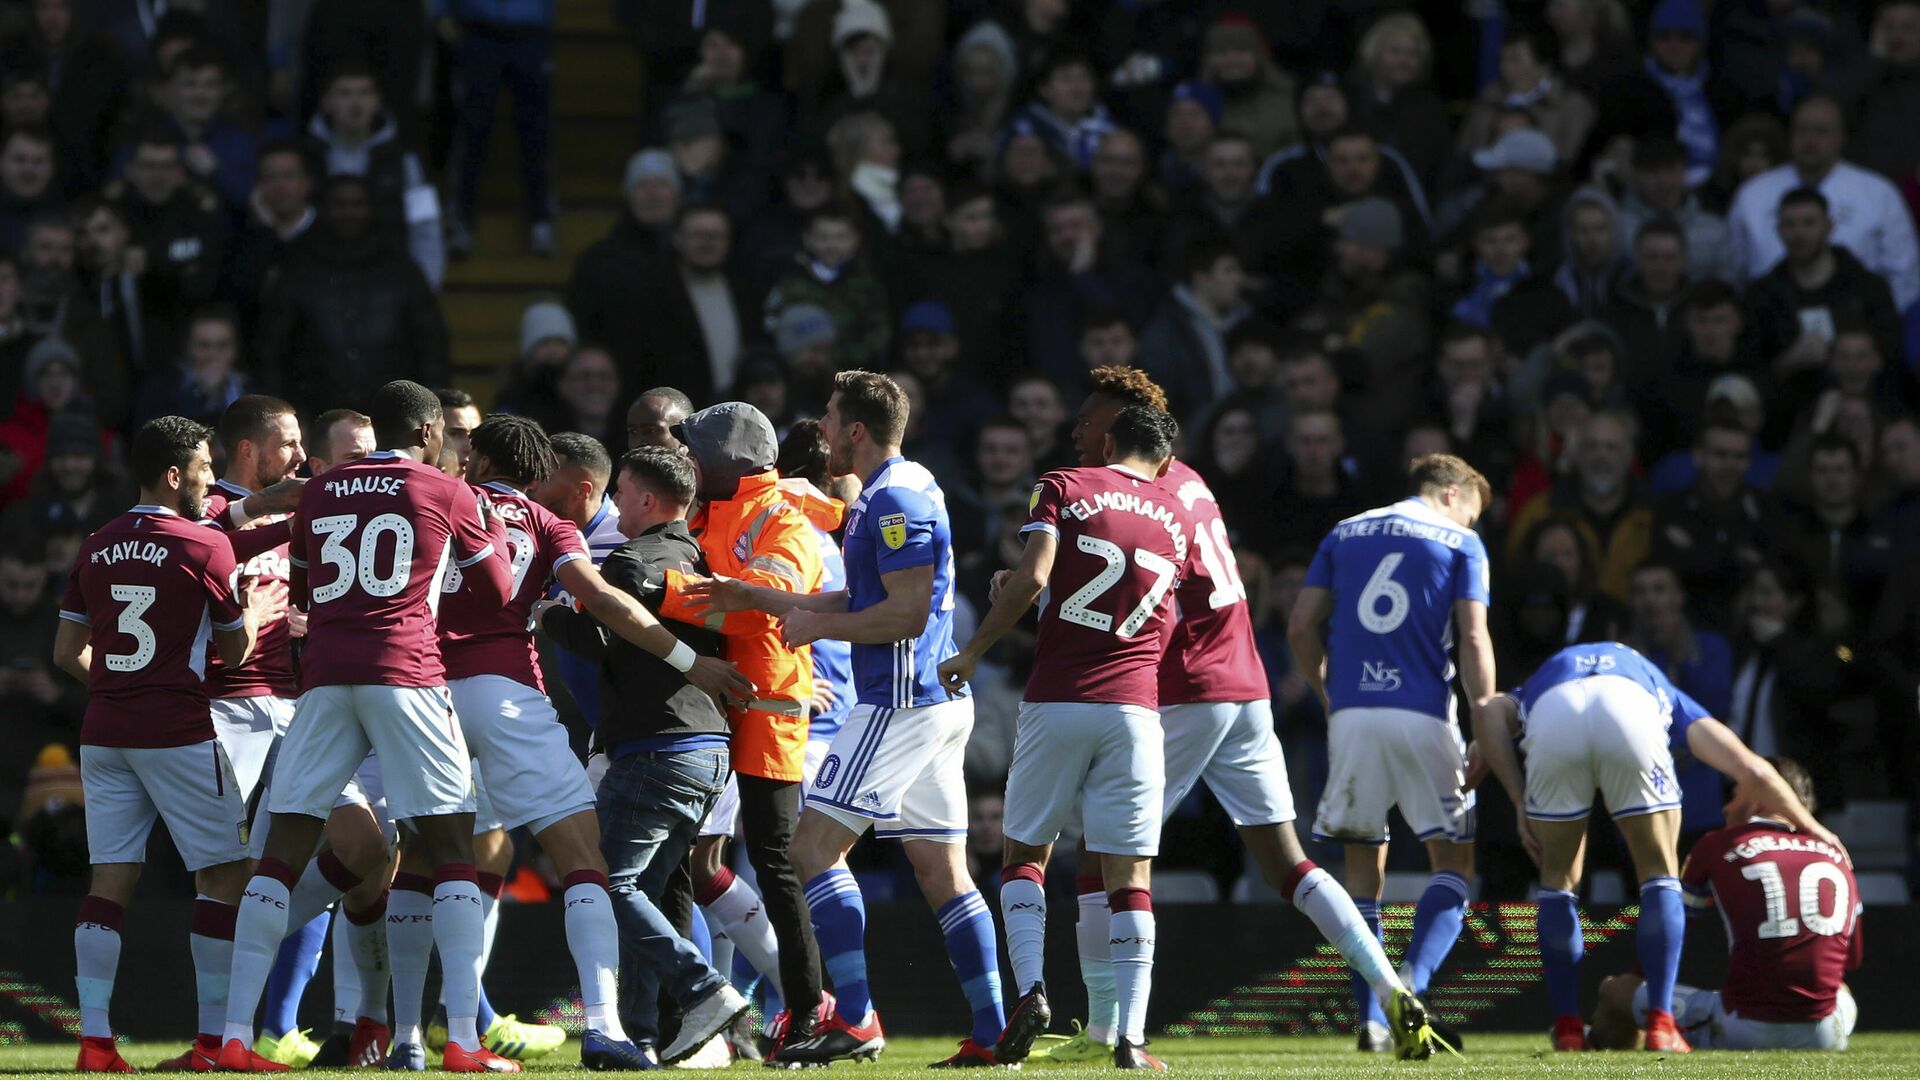 Aston Villa's Jack Grealish sits, nursing a sore head, after being punched by a Birmingham City fan at a game on 10 March 2019 - اسپوتنیک افغانستان  , 1920, 29.05.2021